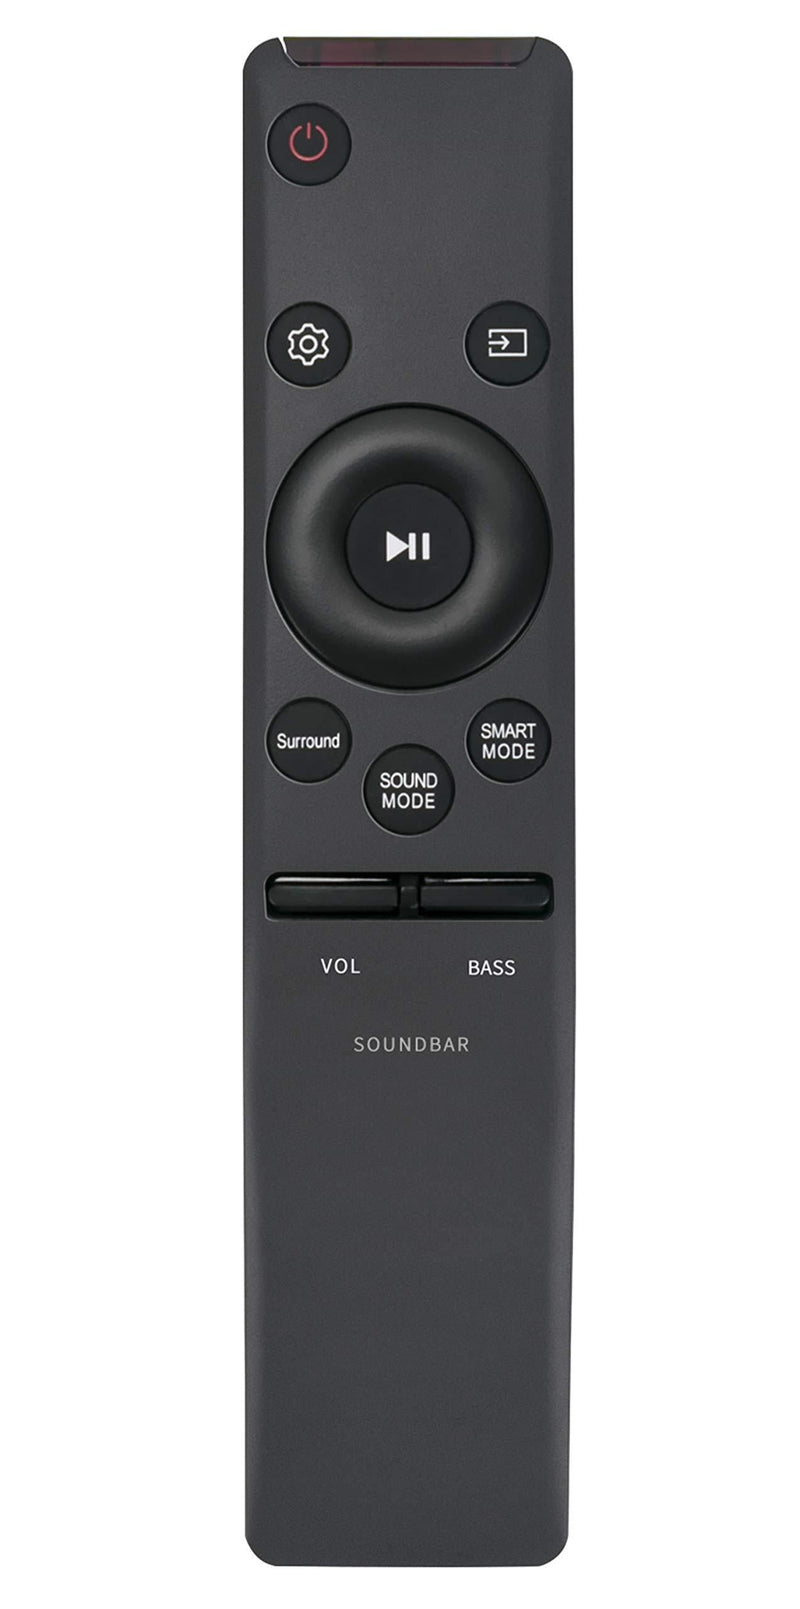 New AH59-02759A Replace Remote fit for Samsung 2017 Sound+ Soundbar HW-MS650 HW-MS6500 HW-MS651 HW-MS550 HW-MS551 HM-MS650 HW-MS751 HW-MS650 HW-MS6501 HW-MS750 HW-MS57C HW-MS650/ZA HW-MS651/ZA - LeoForward Australia